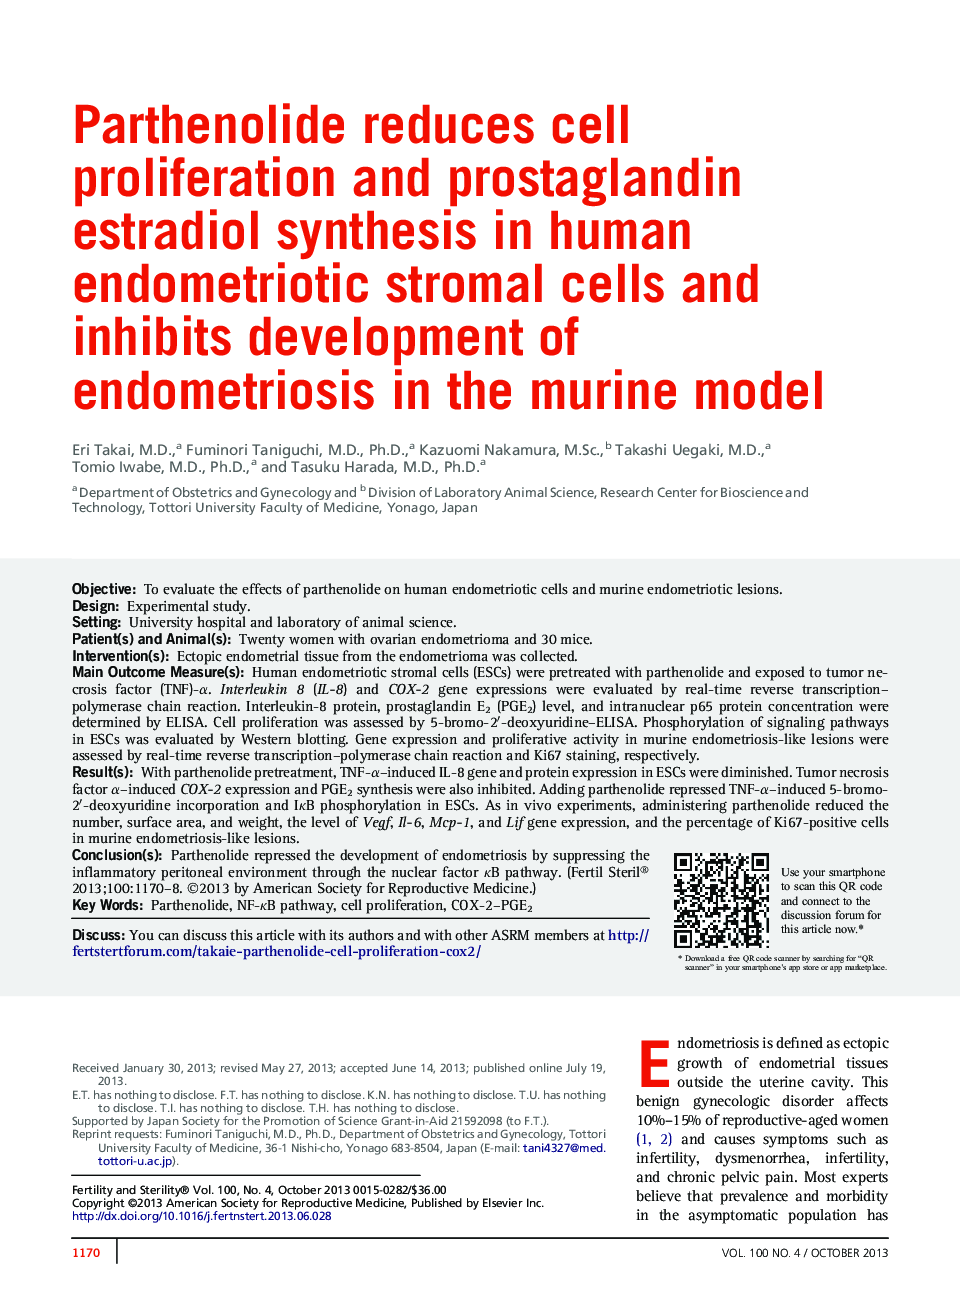 Parthenolide reduces cell proliferation and prostaglandin estradiol synthesis in human endometriotic stromal cells and inhibits development of endometriosis inÂ theÂ murine model